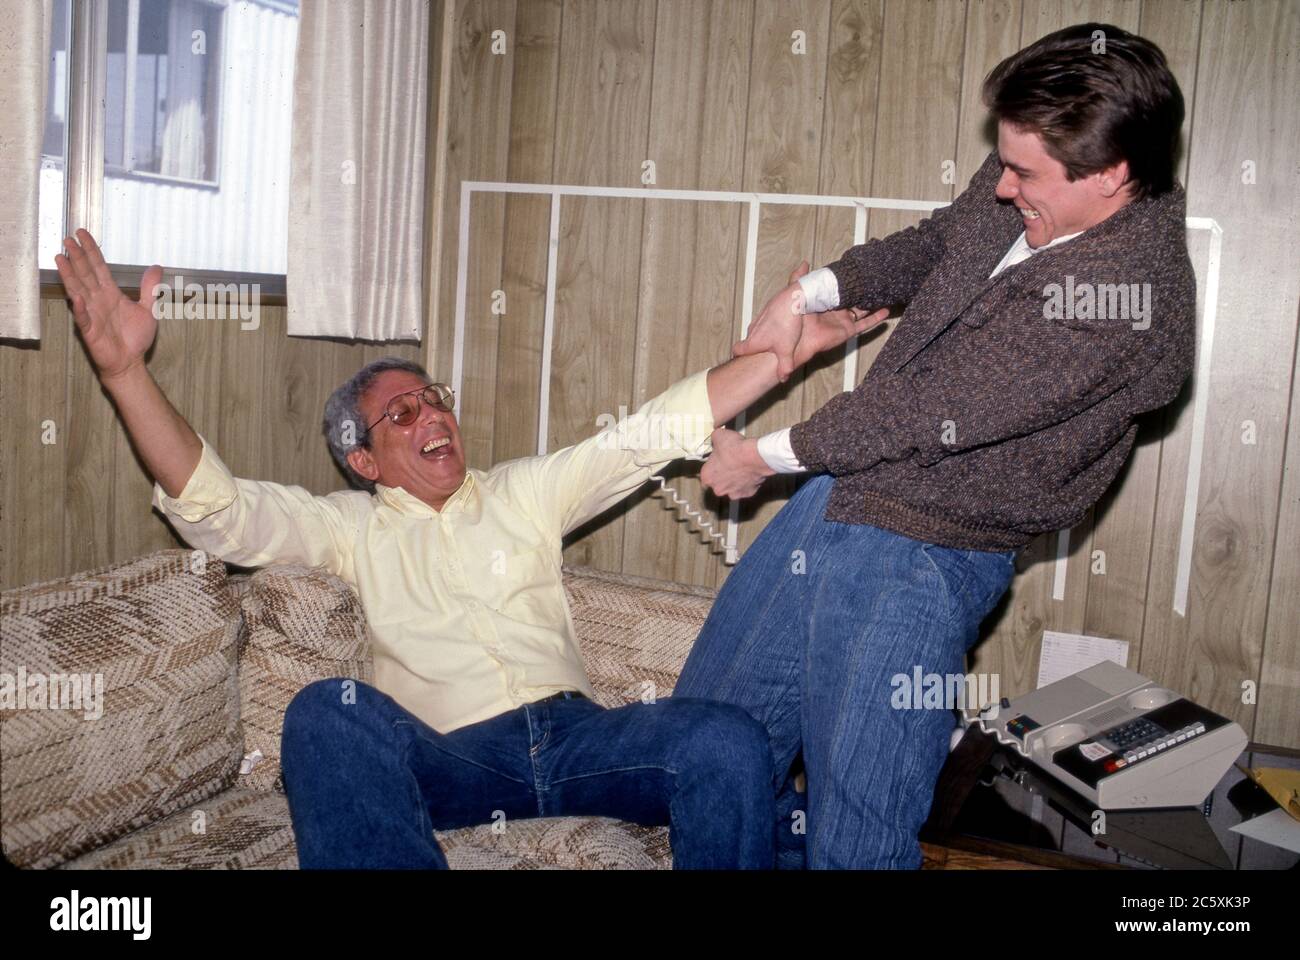 A young Jim Carrey acting out with his agent buddy Morra in his trailer on a movie lot circa 1984. Stock Photo